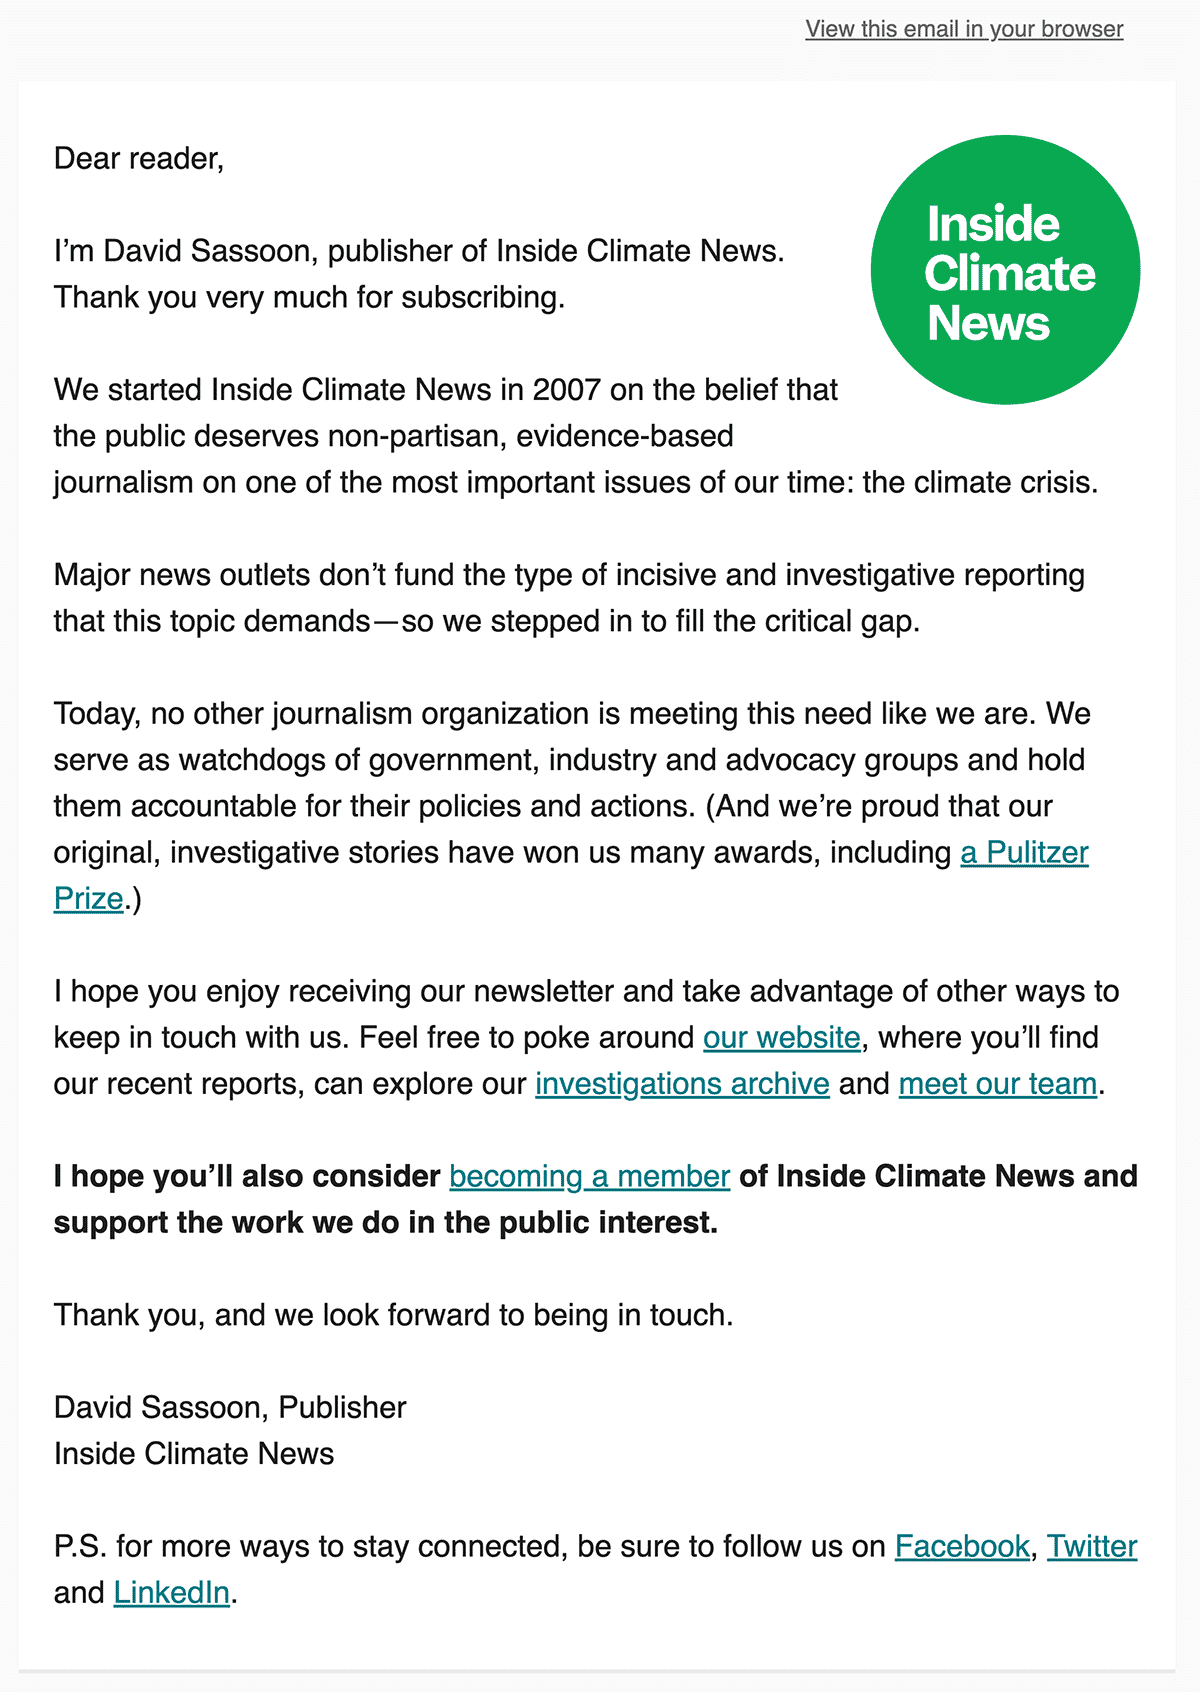 Inside Climate News Welcome Email 2022